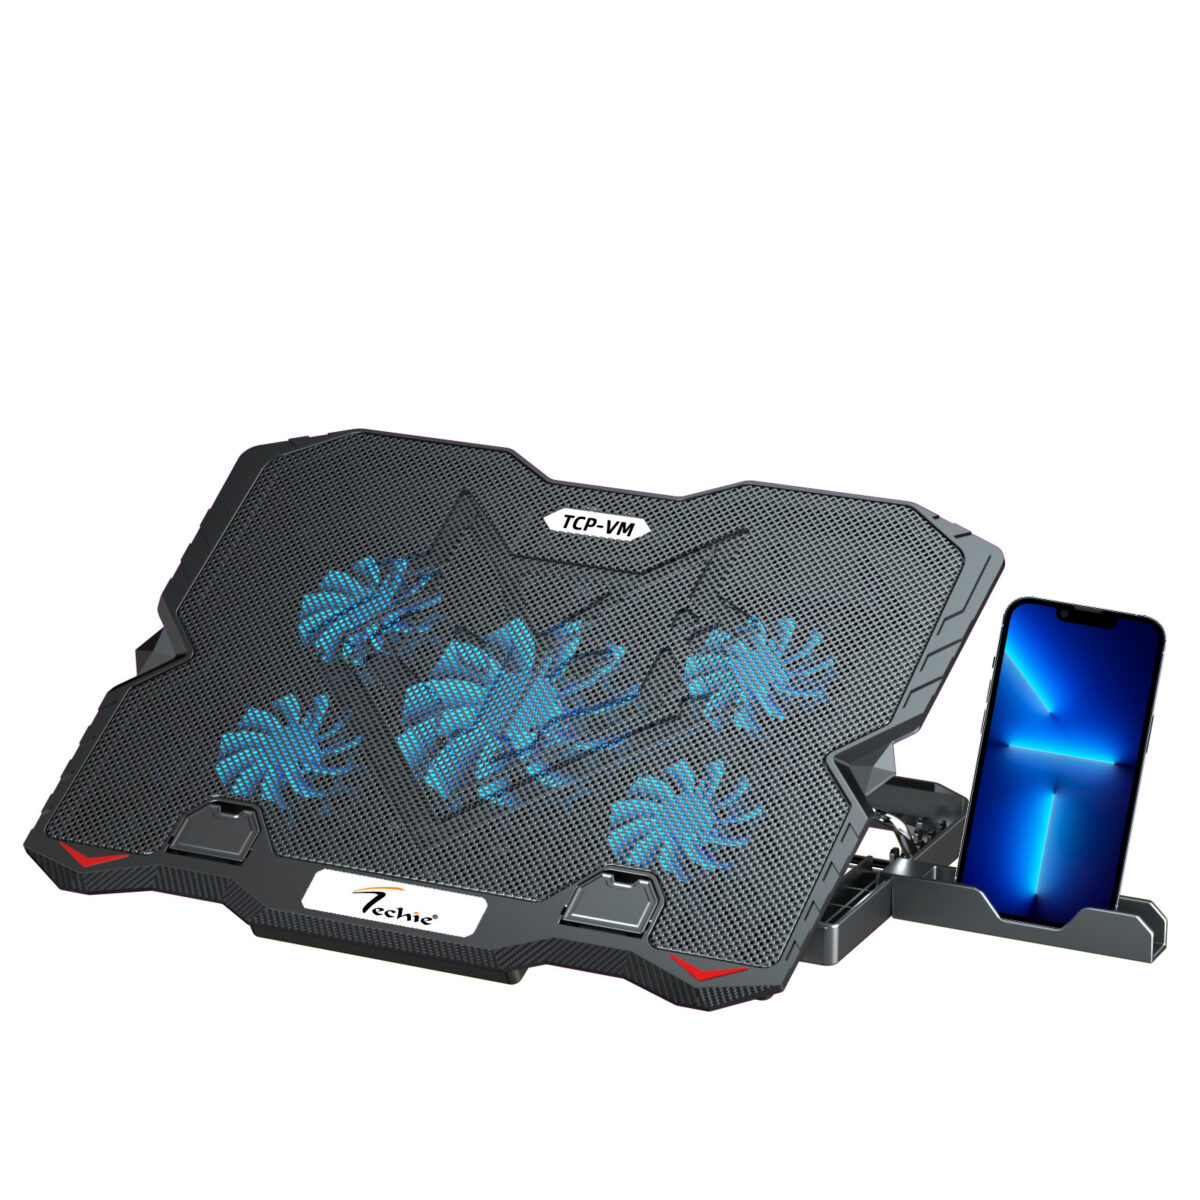 Techie 5 Fan Laptop Cooling Pad With Speed Control and Mobile Stand